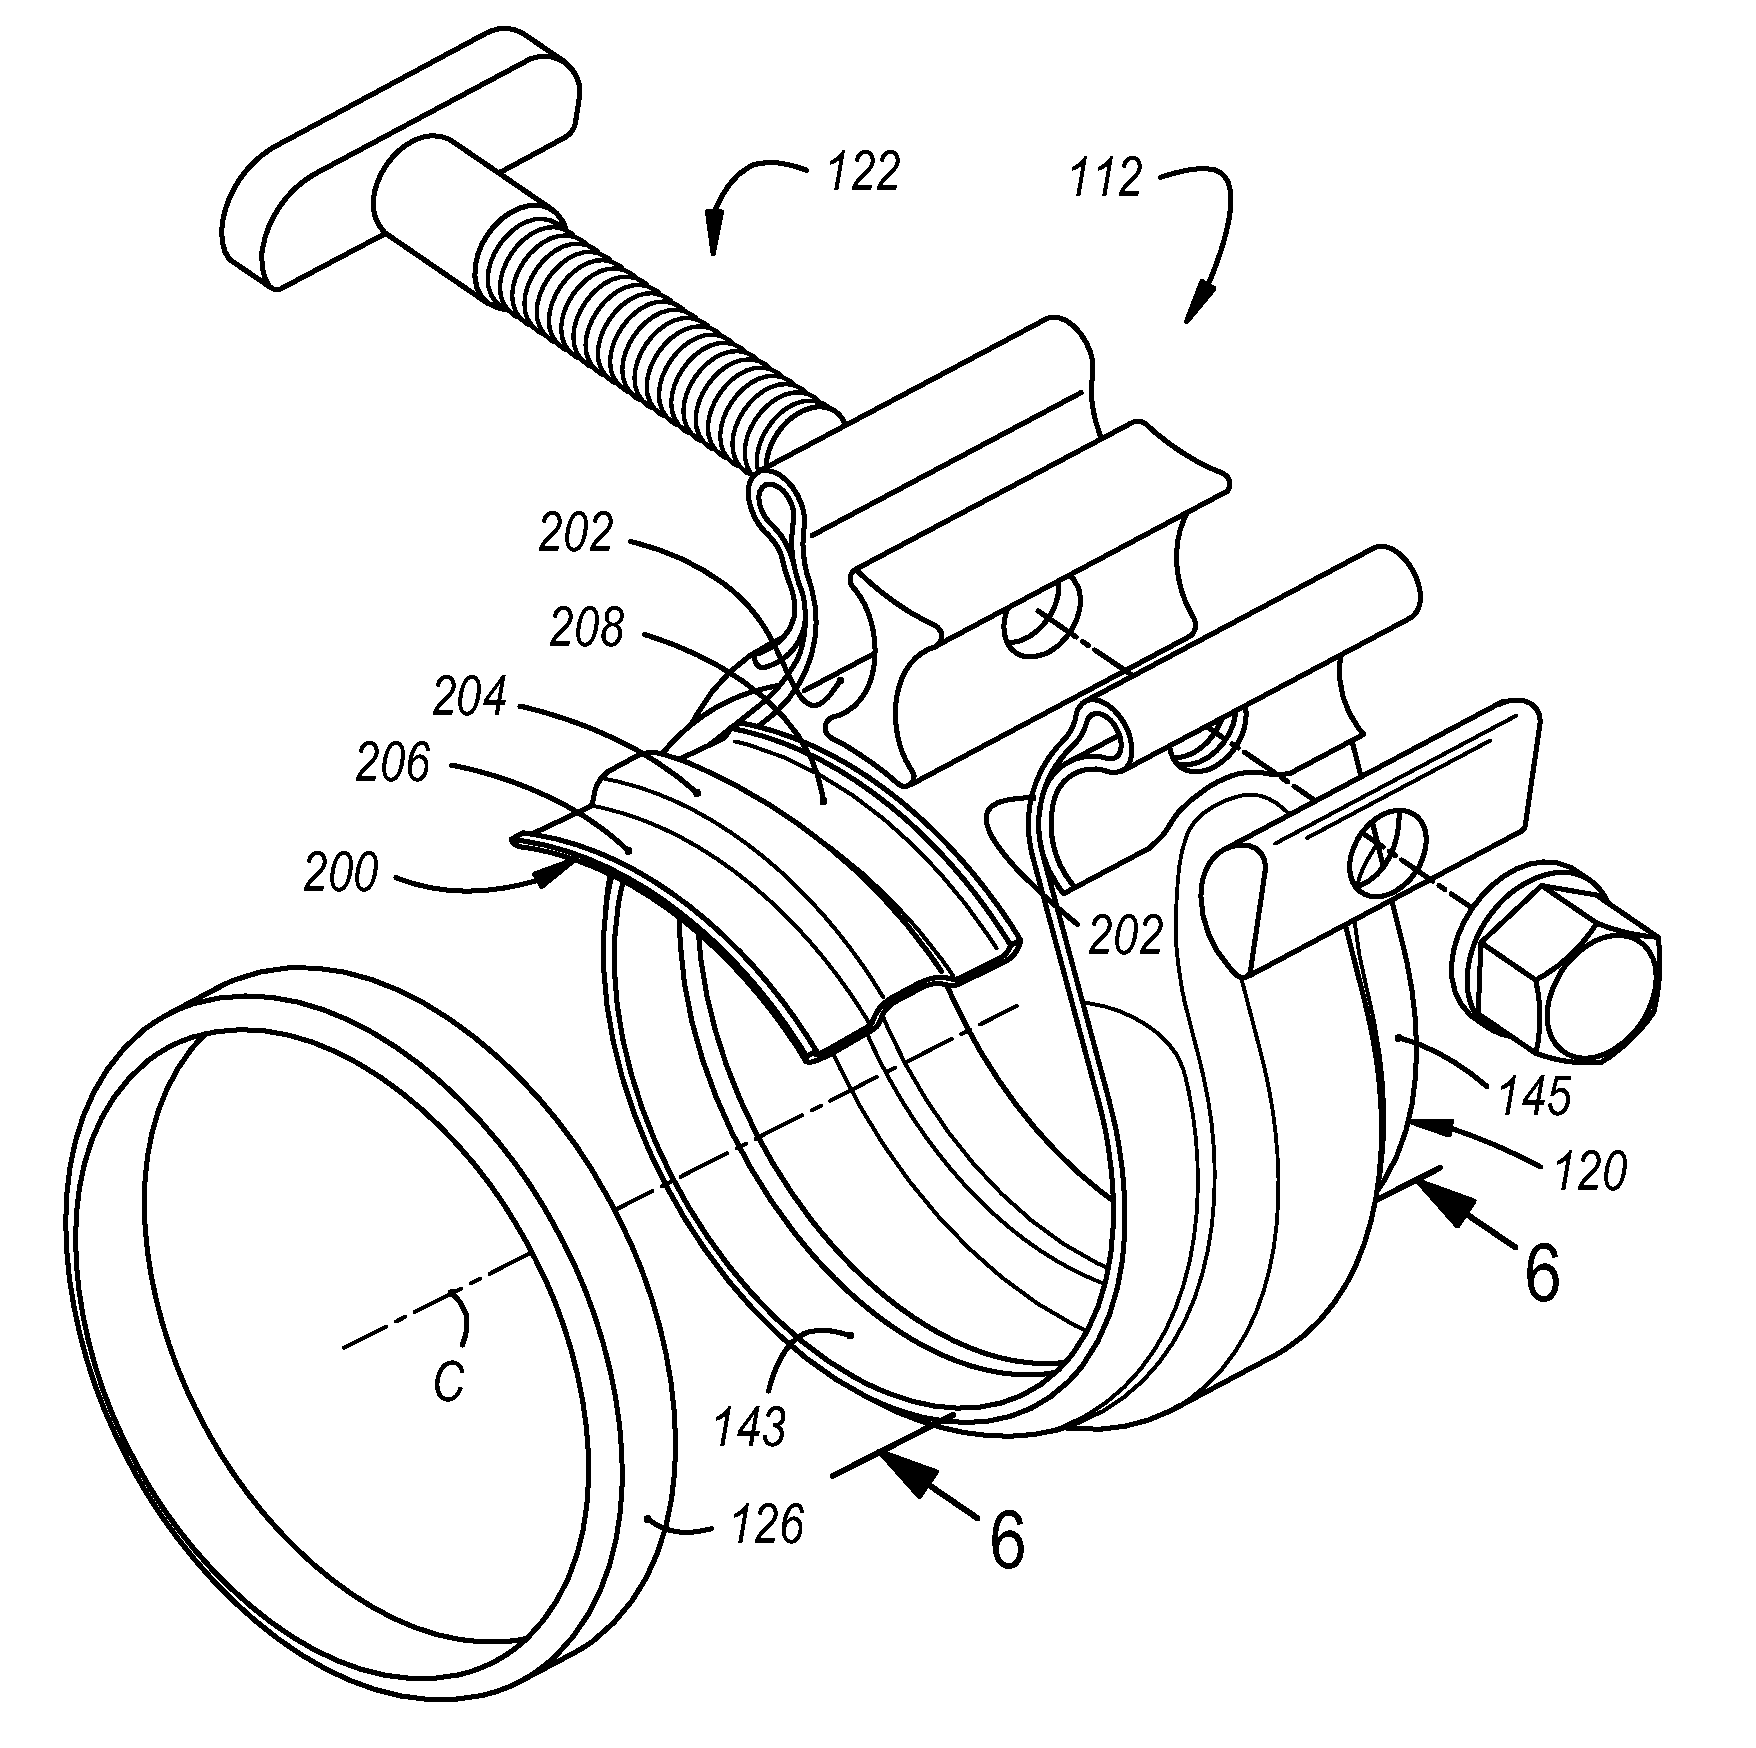 Single-bolt band clamp with gasketed center rib and pipe lap joint using the same